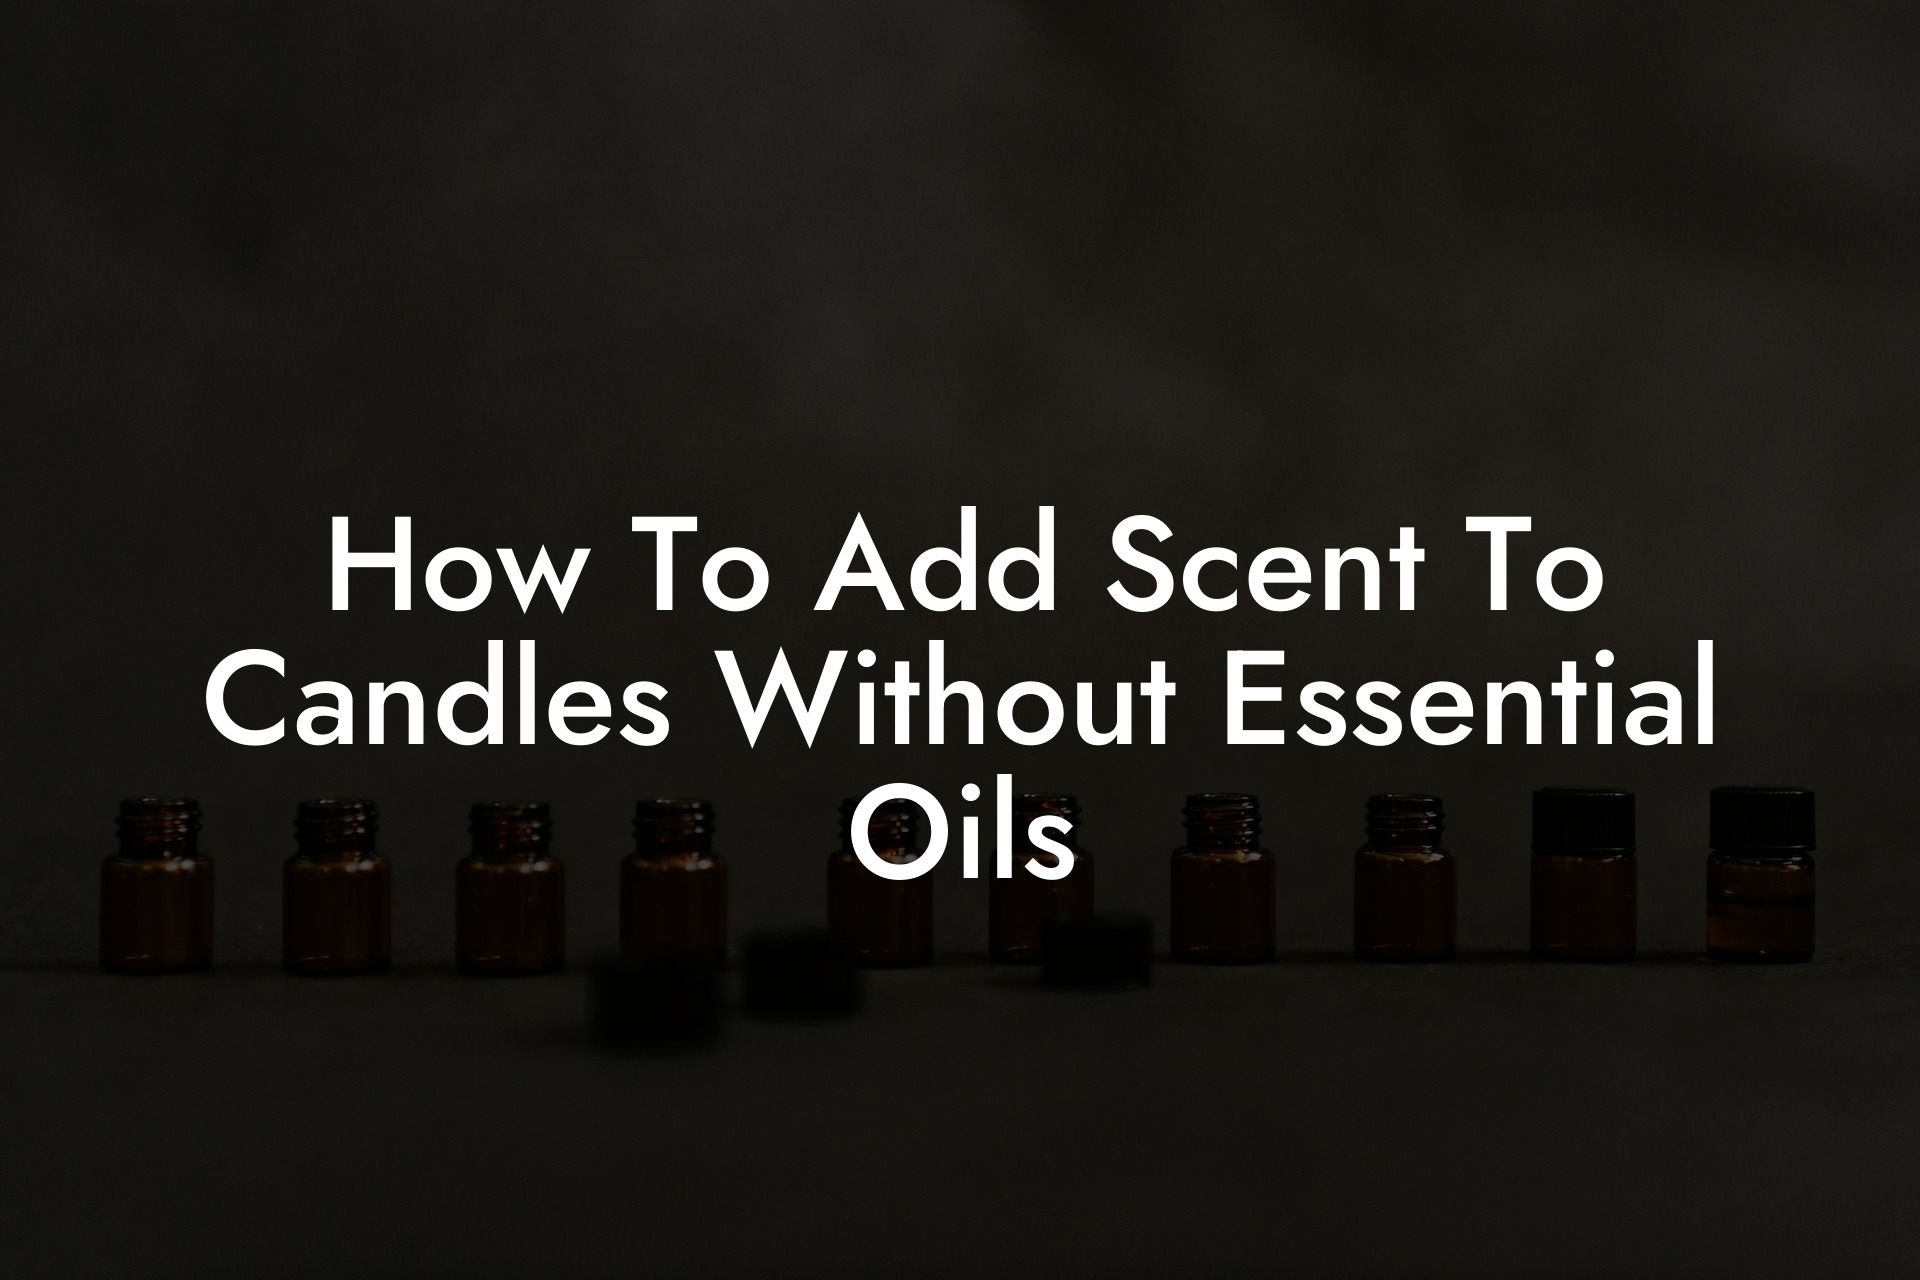 How To Add Scent To Candles Without Essential Oils